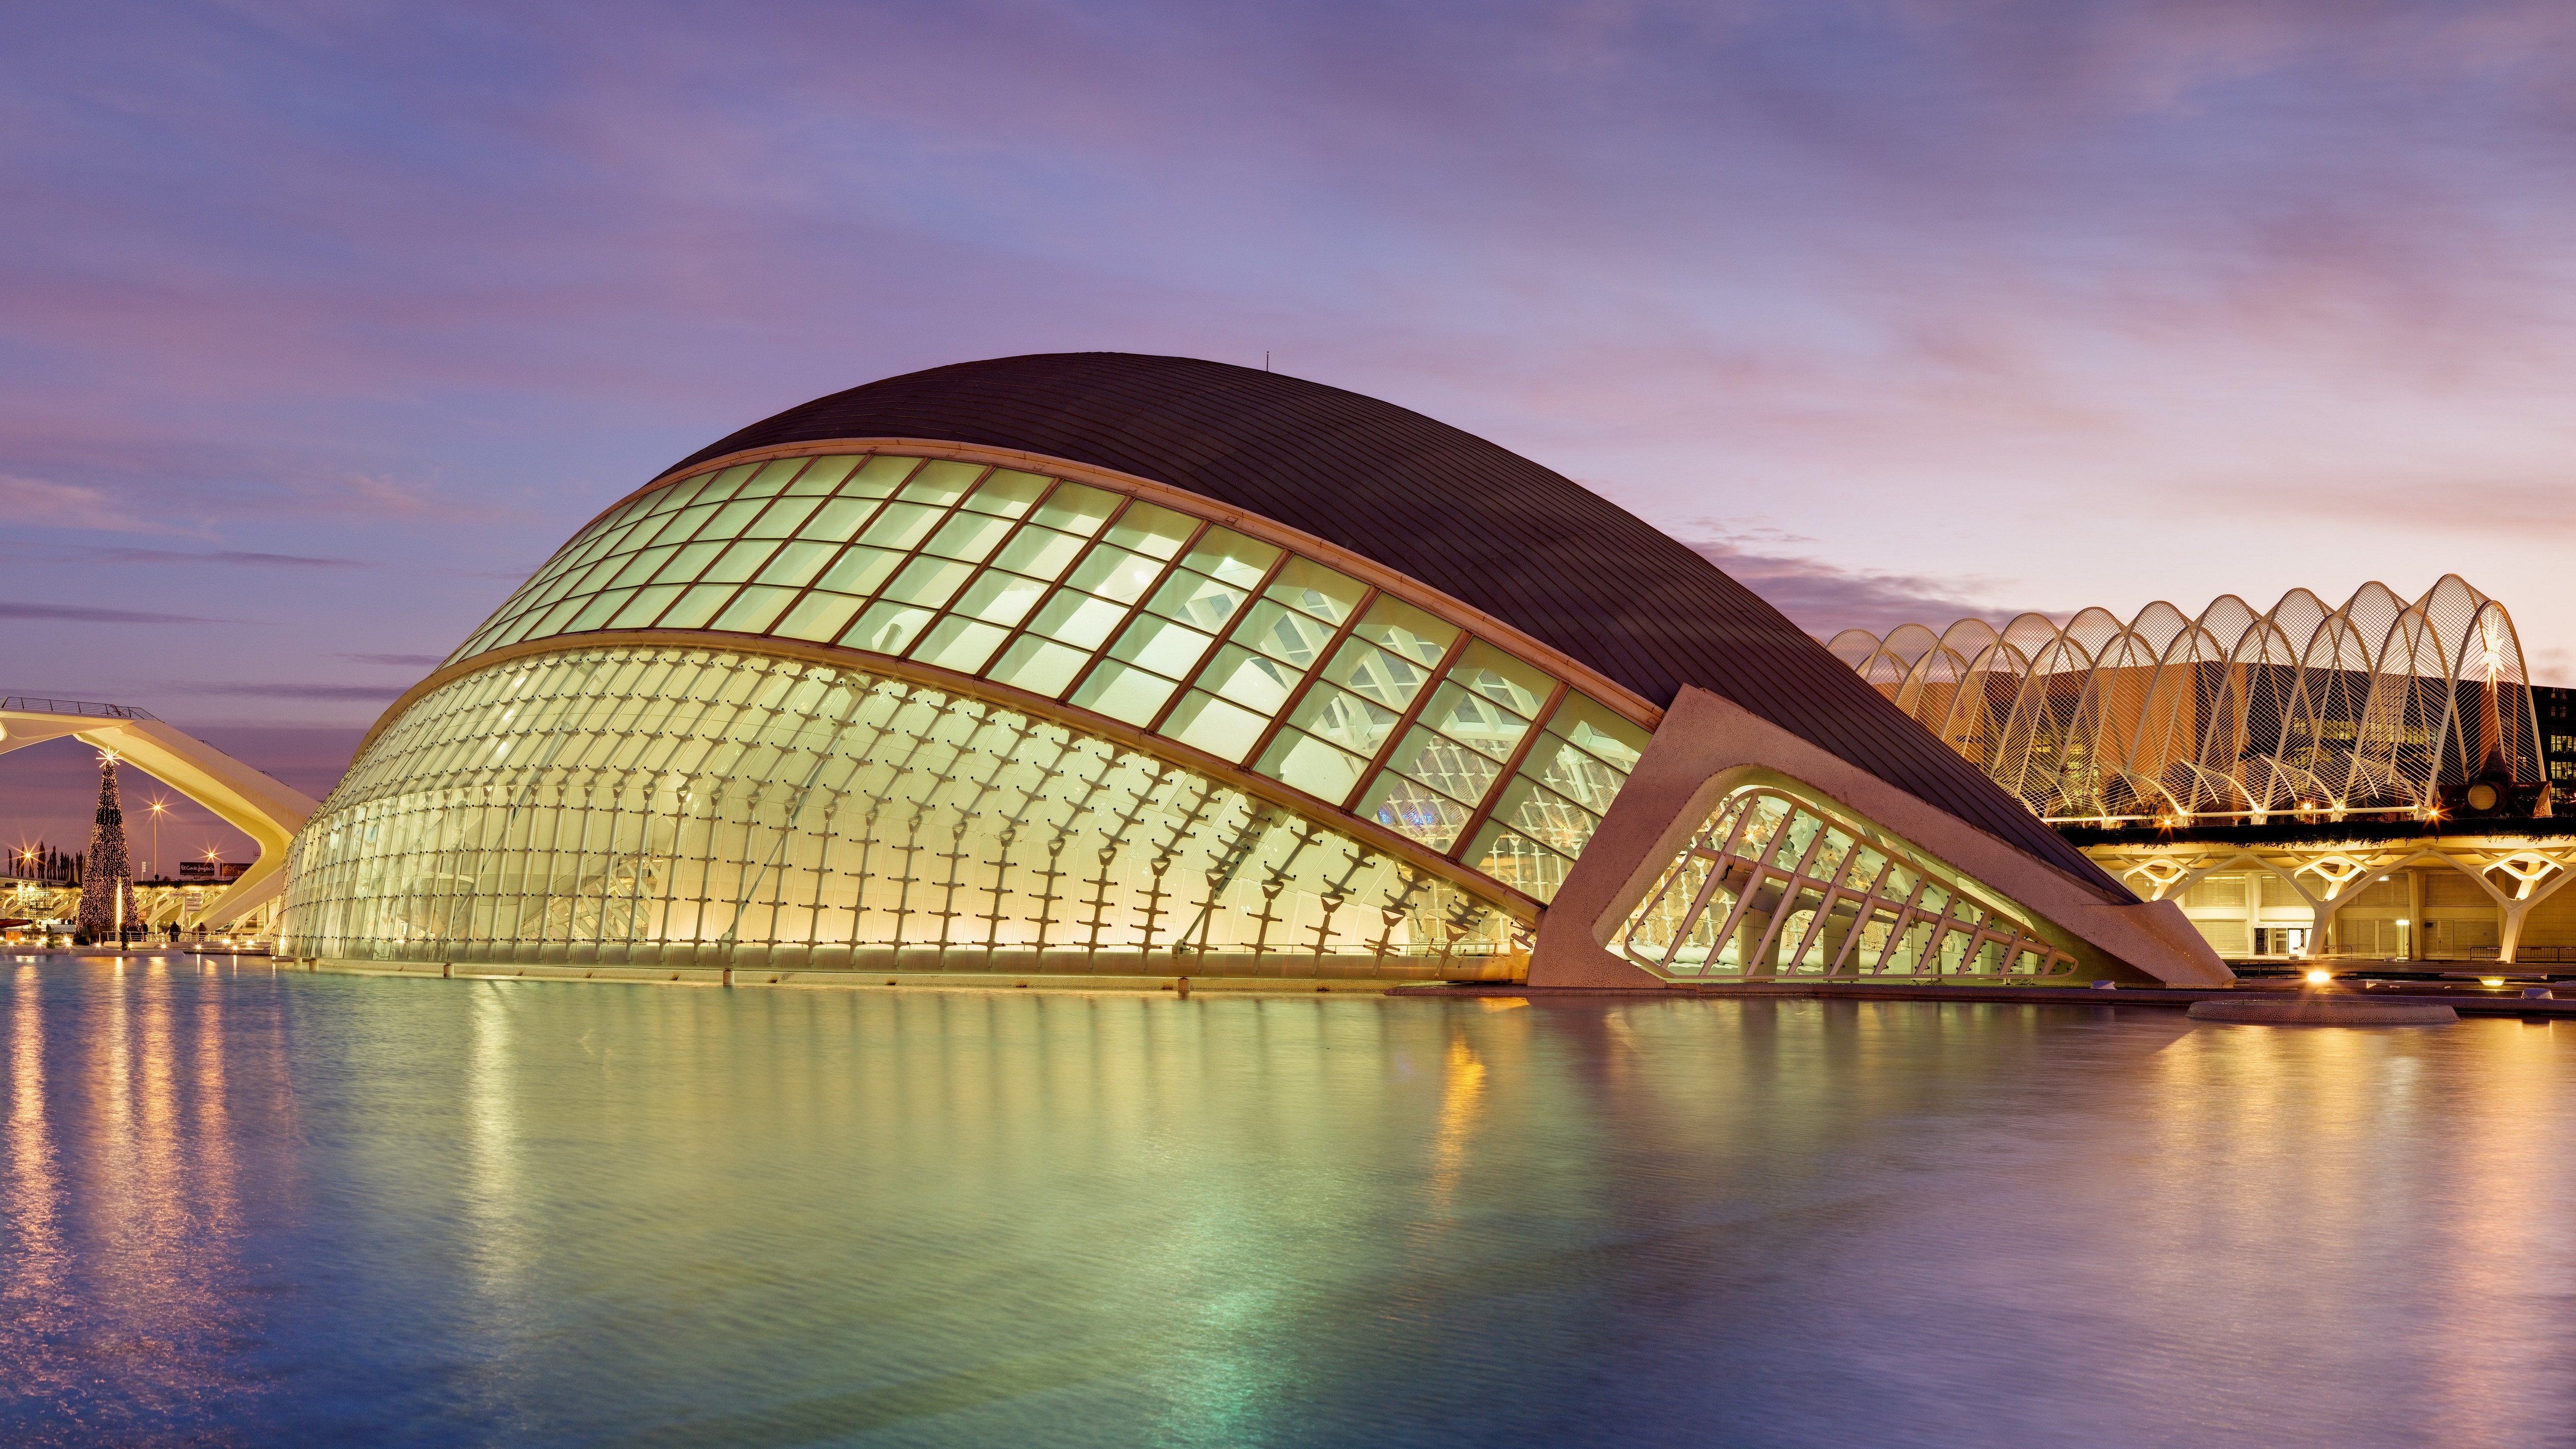 General 5120x2880 photography water building architecture Spain museum valencia